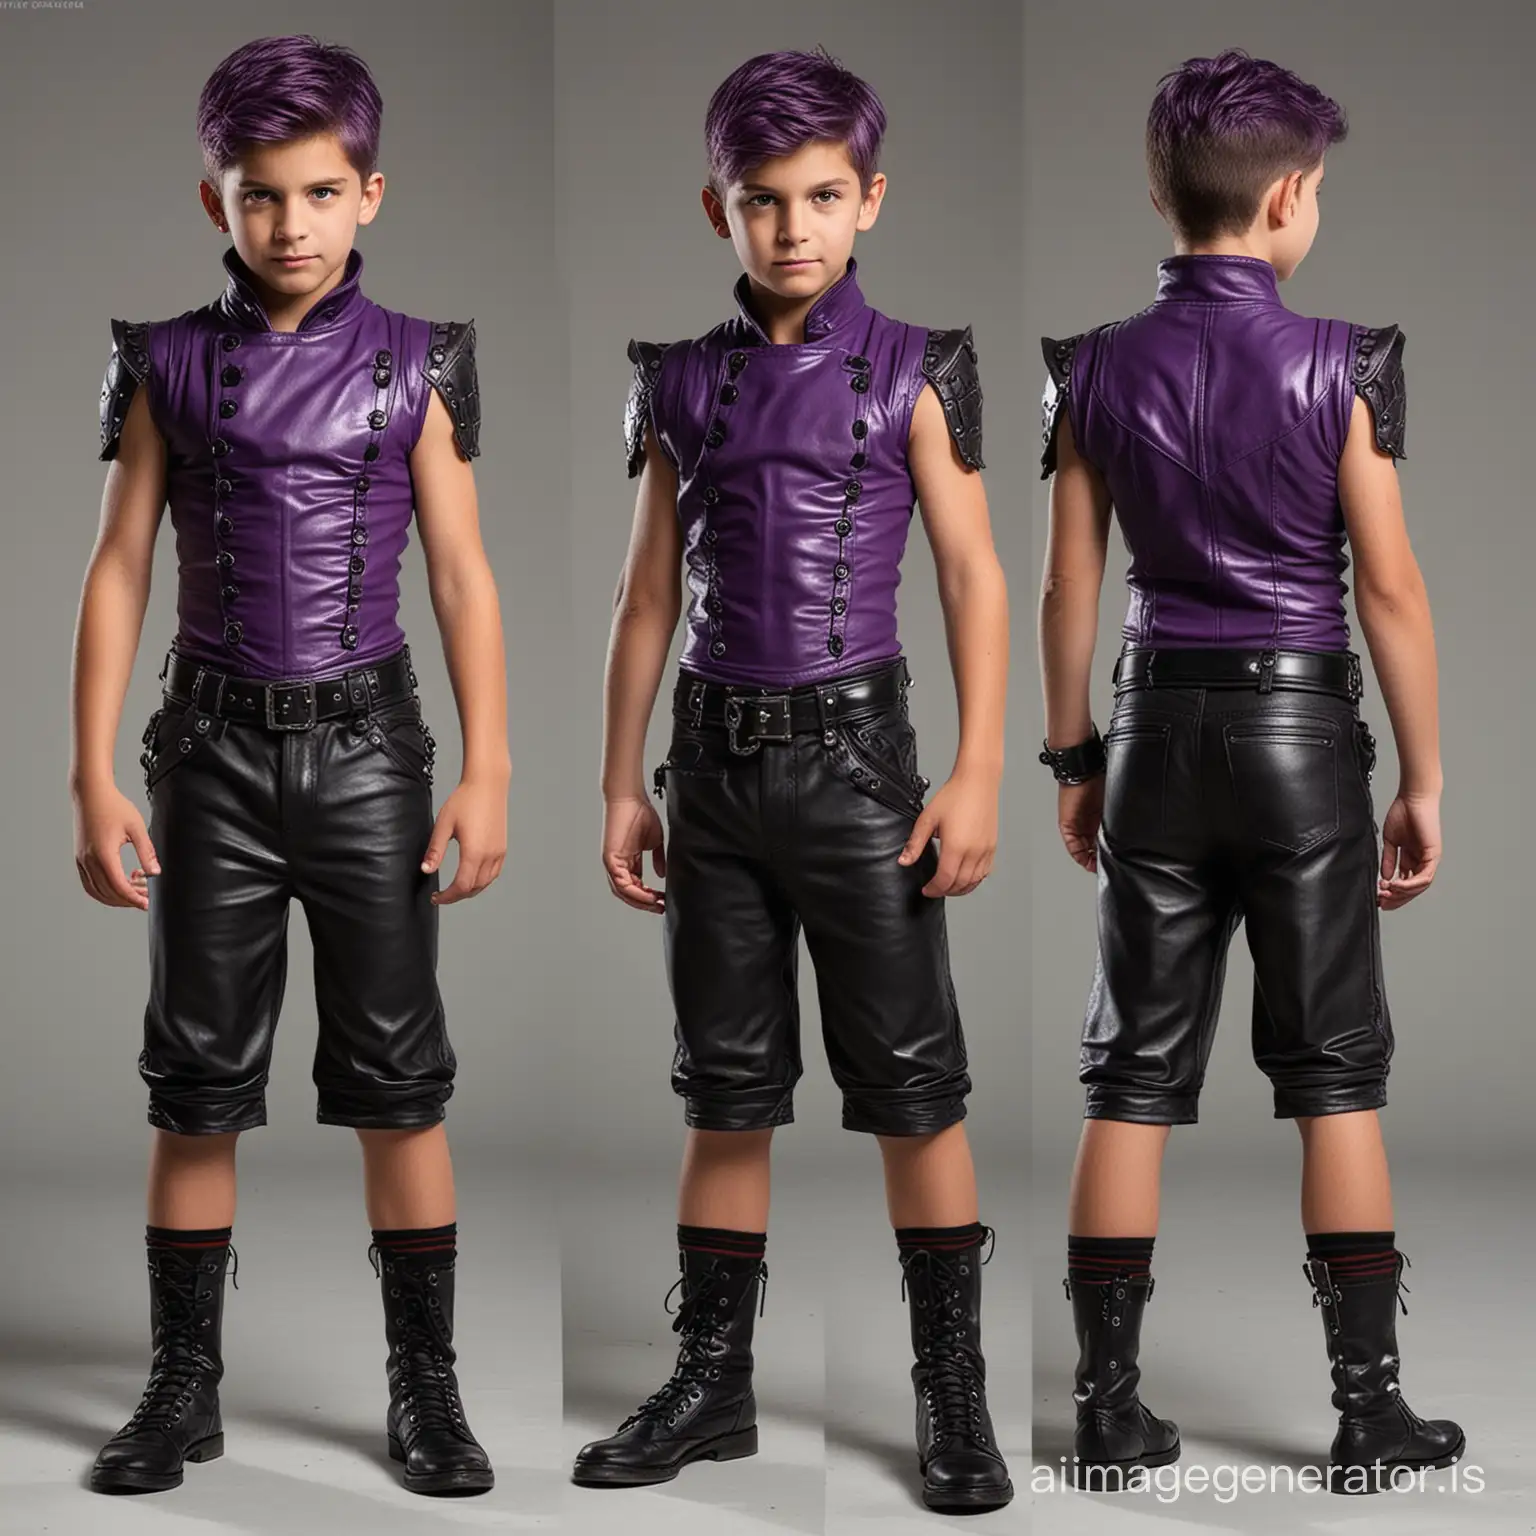 8YearOld-Boy-Villain-in-Intimidating-Leather-Outfit-with-Purple-and-RedGreen-Accents